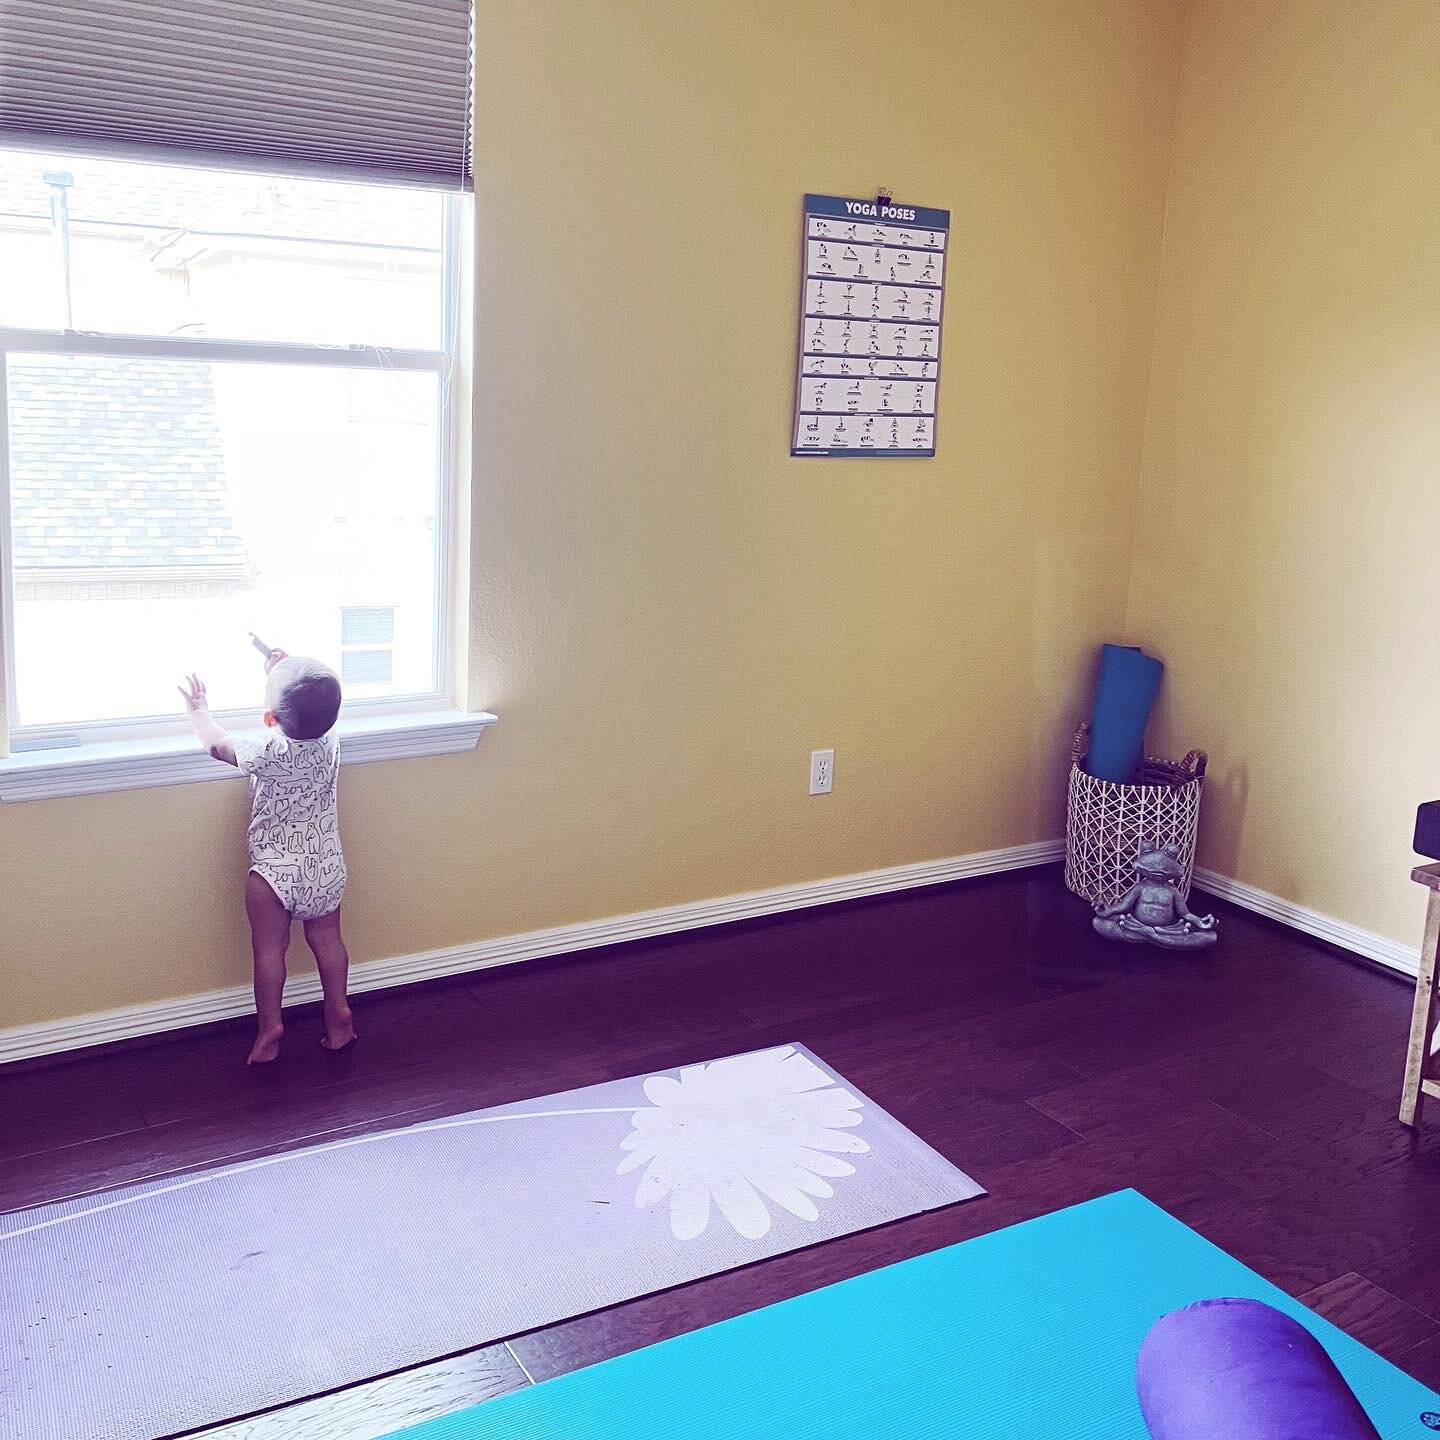 I am so excited to let you know I will be back on the mat to teach kids yoga in person again soon! I am incredibly happy, over the clouds, and so so soooo excited for my upcoming 95 hours &ldquo;Trauma-Sensitive Children&rsquo;s Yoga Teacher Training